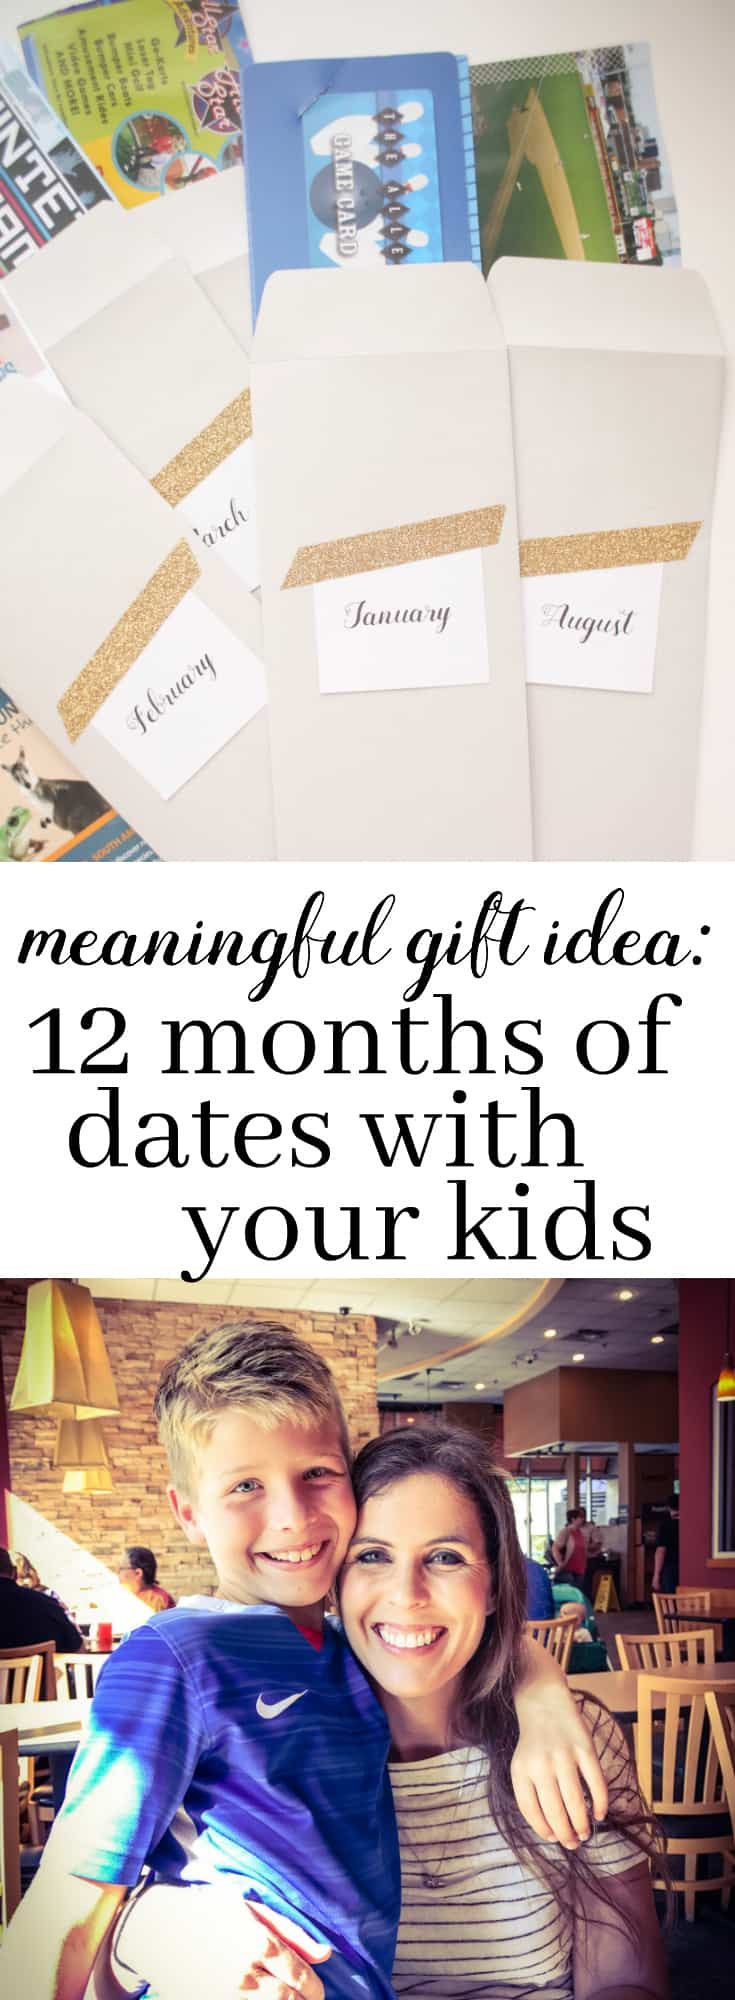 Experience Gifts For Kids
 Experience Gift Idea 12 Months of Pre Planned "Dates